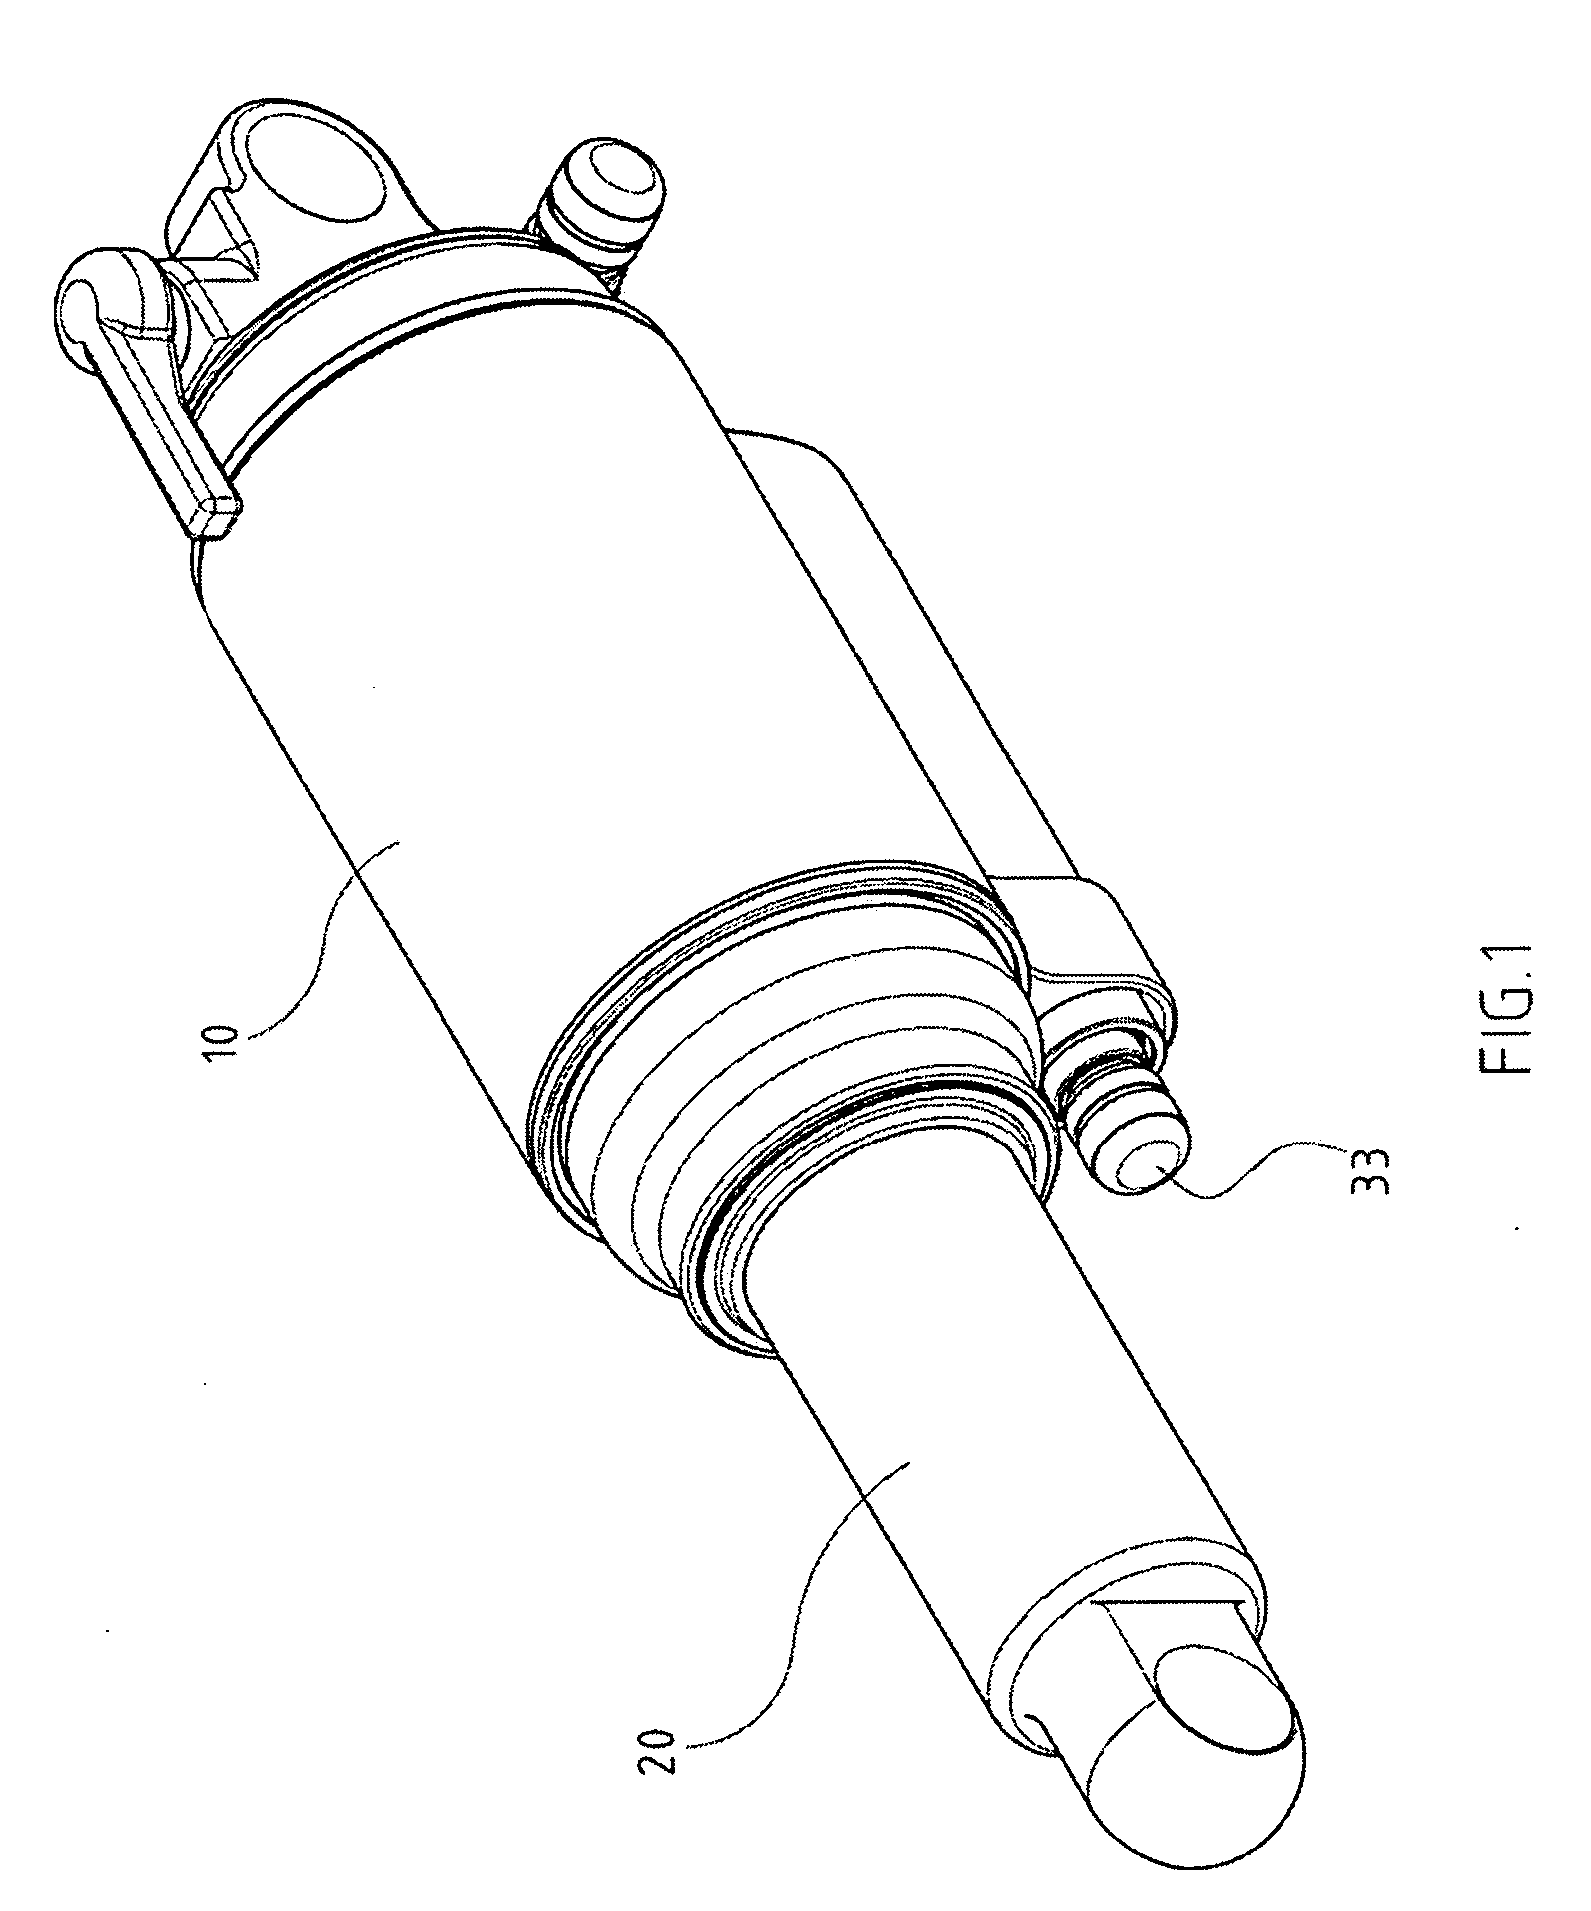 Pneumatic shock absorber with an ancillary air chamber